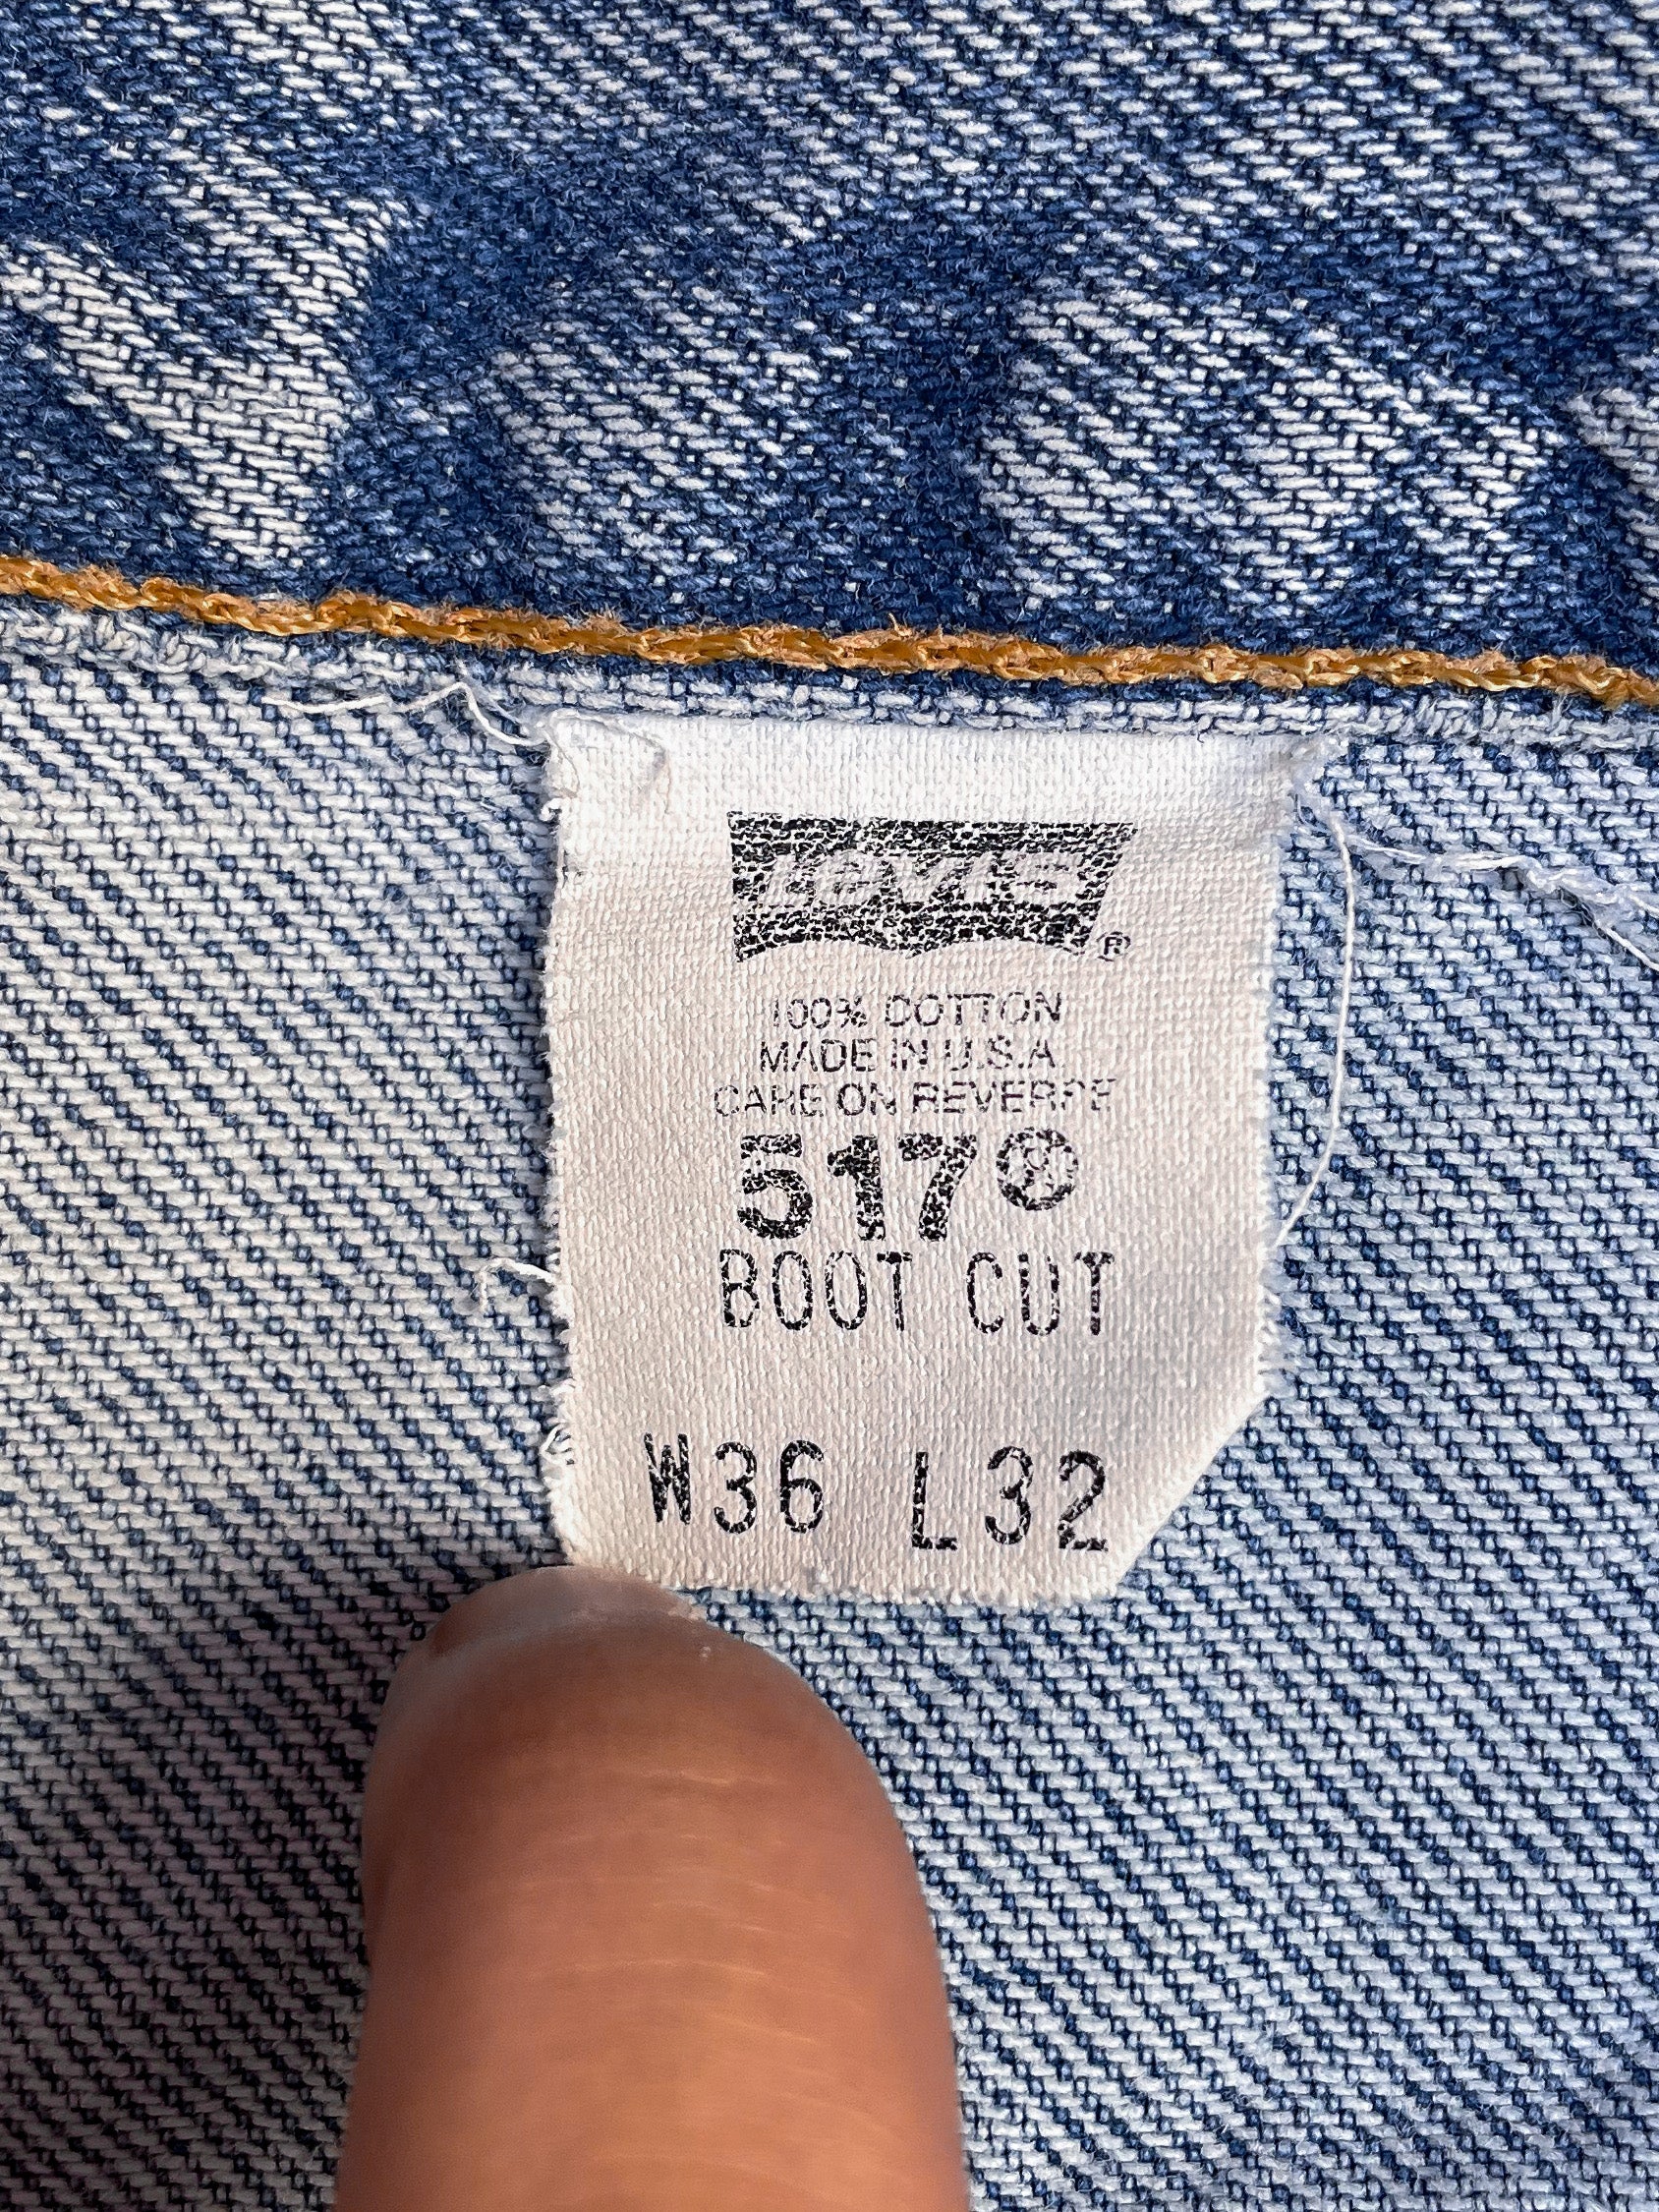 Vintage Levi’s Repaired Faded Blue 517 (33X30)